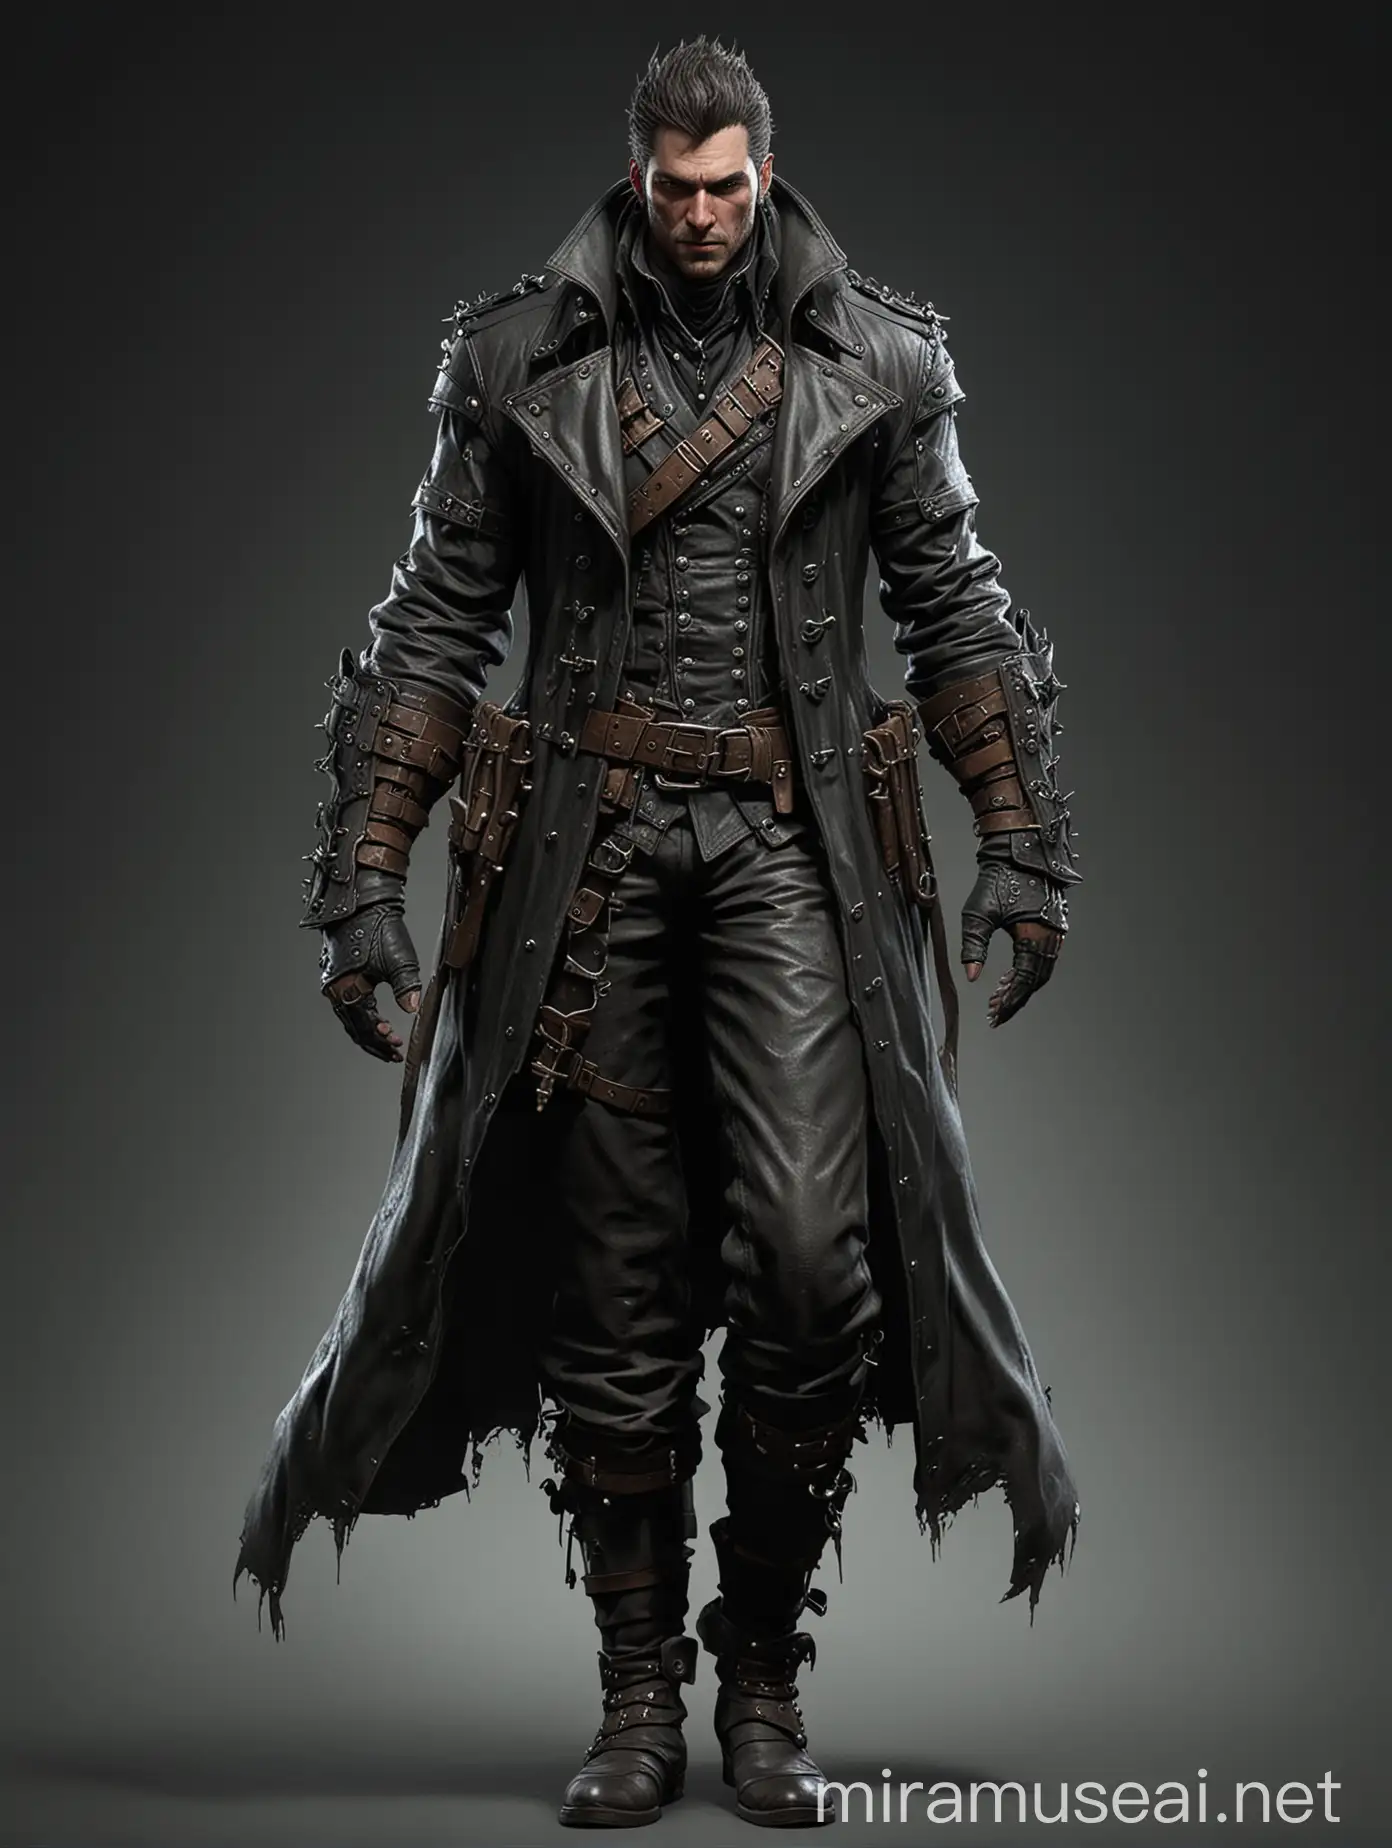 Fantasy character design, fullbody, strong male, heavy leather coat with many buckles, bloodborne